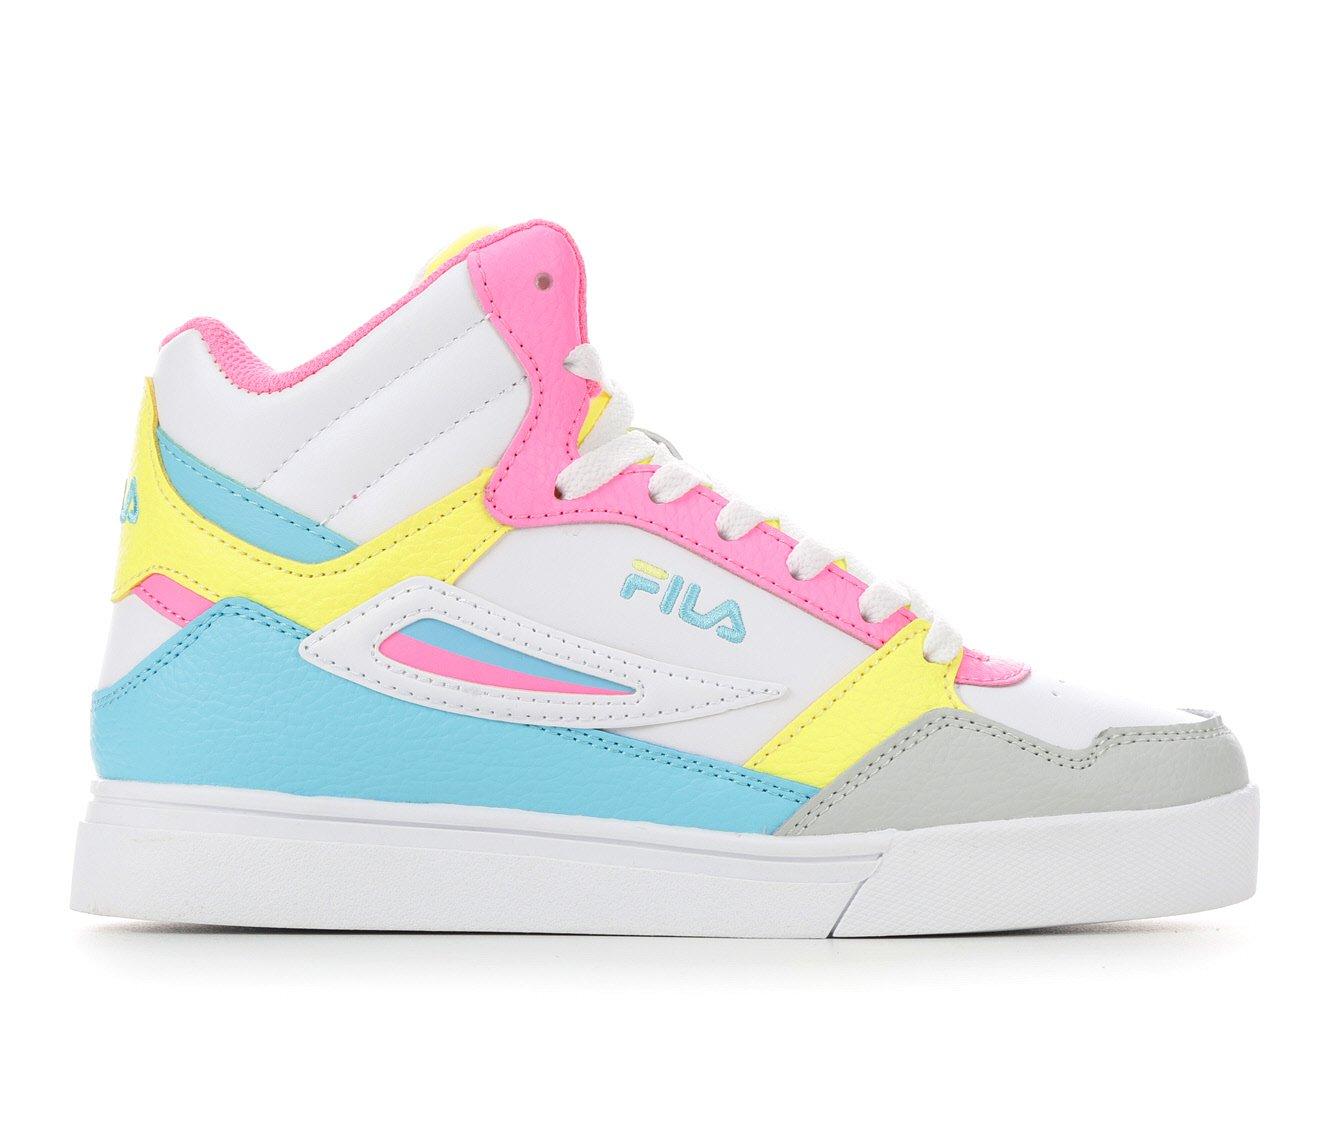 FILA Shoes, Sneakers, Kids' Gym Shoes & Accessories | Shoe Carnival